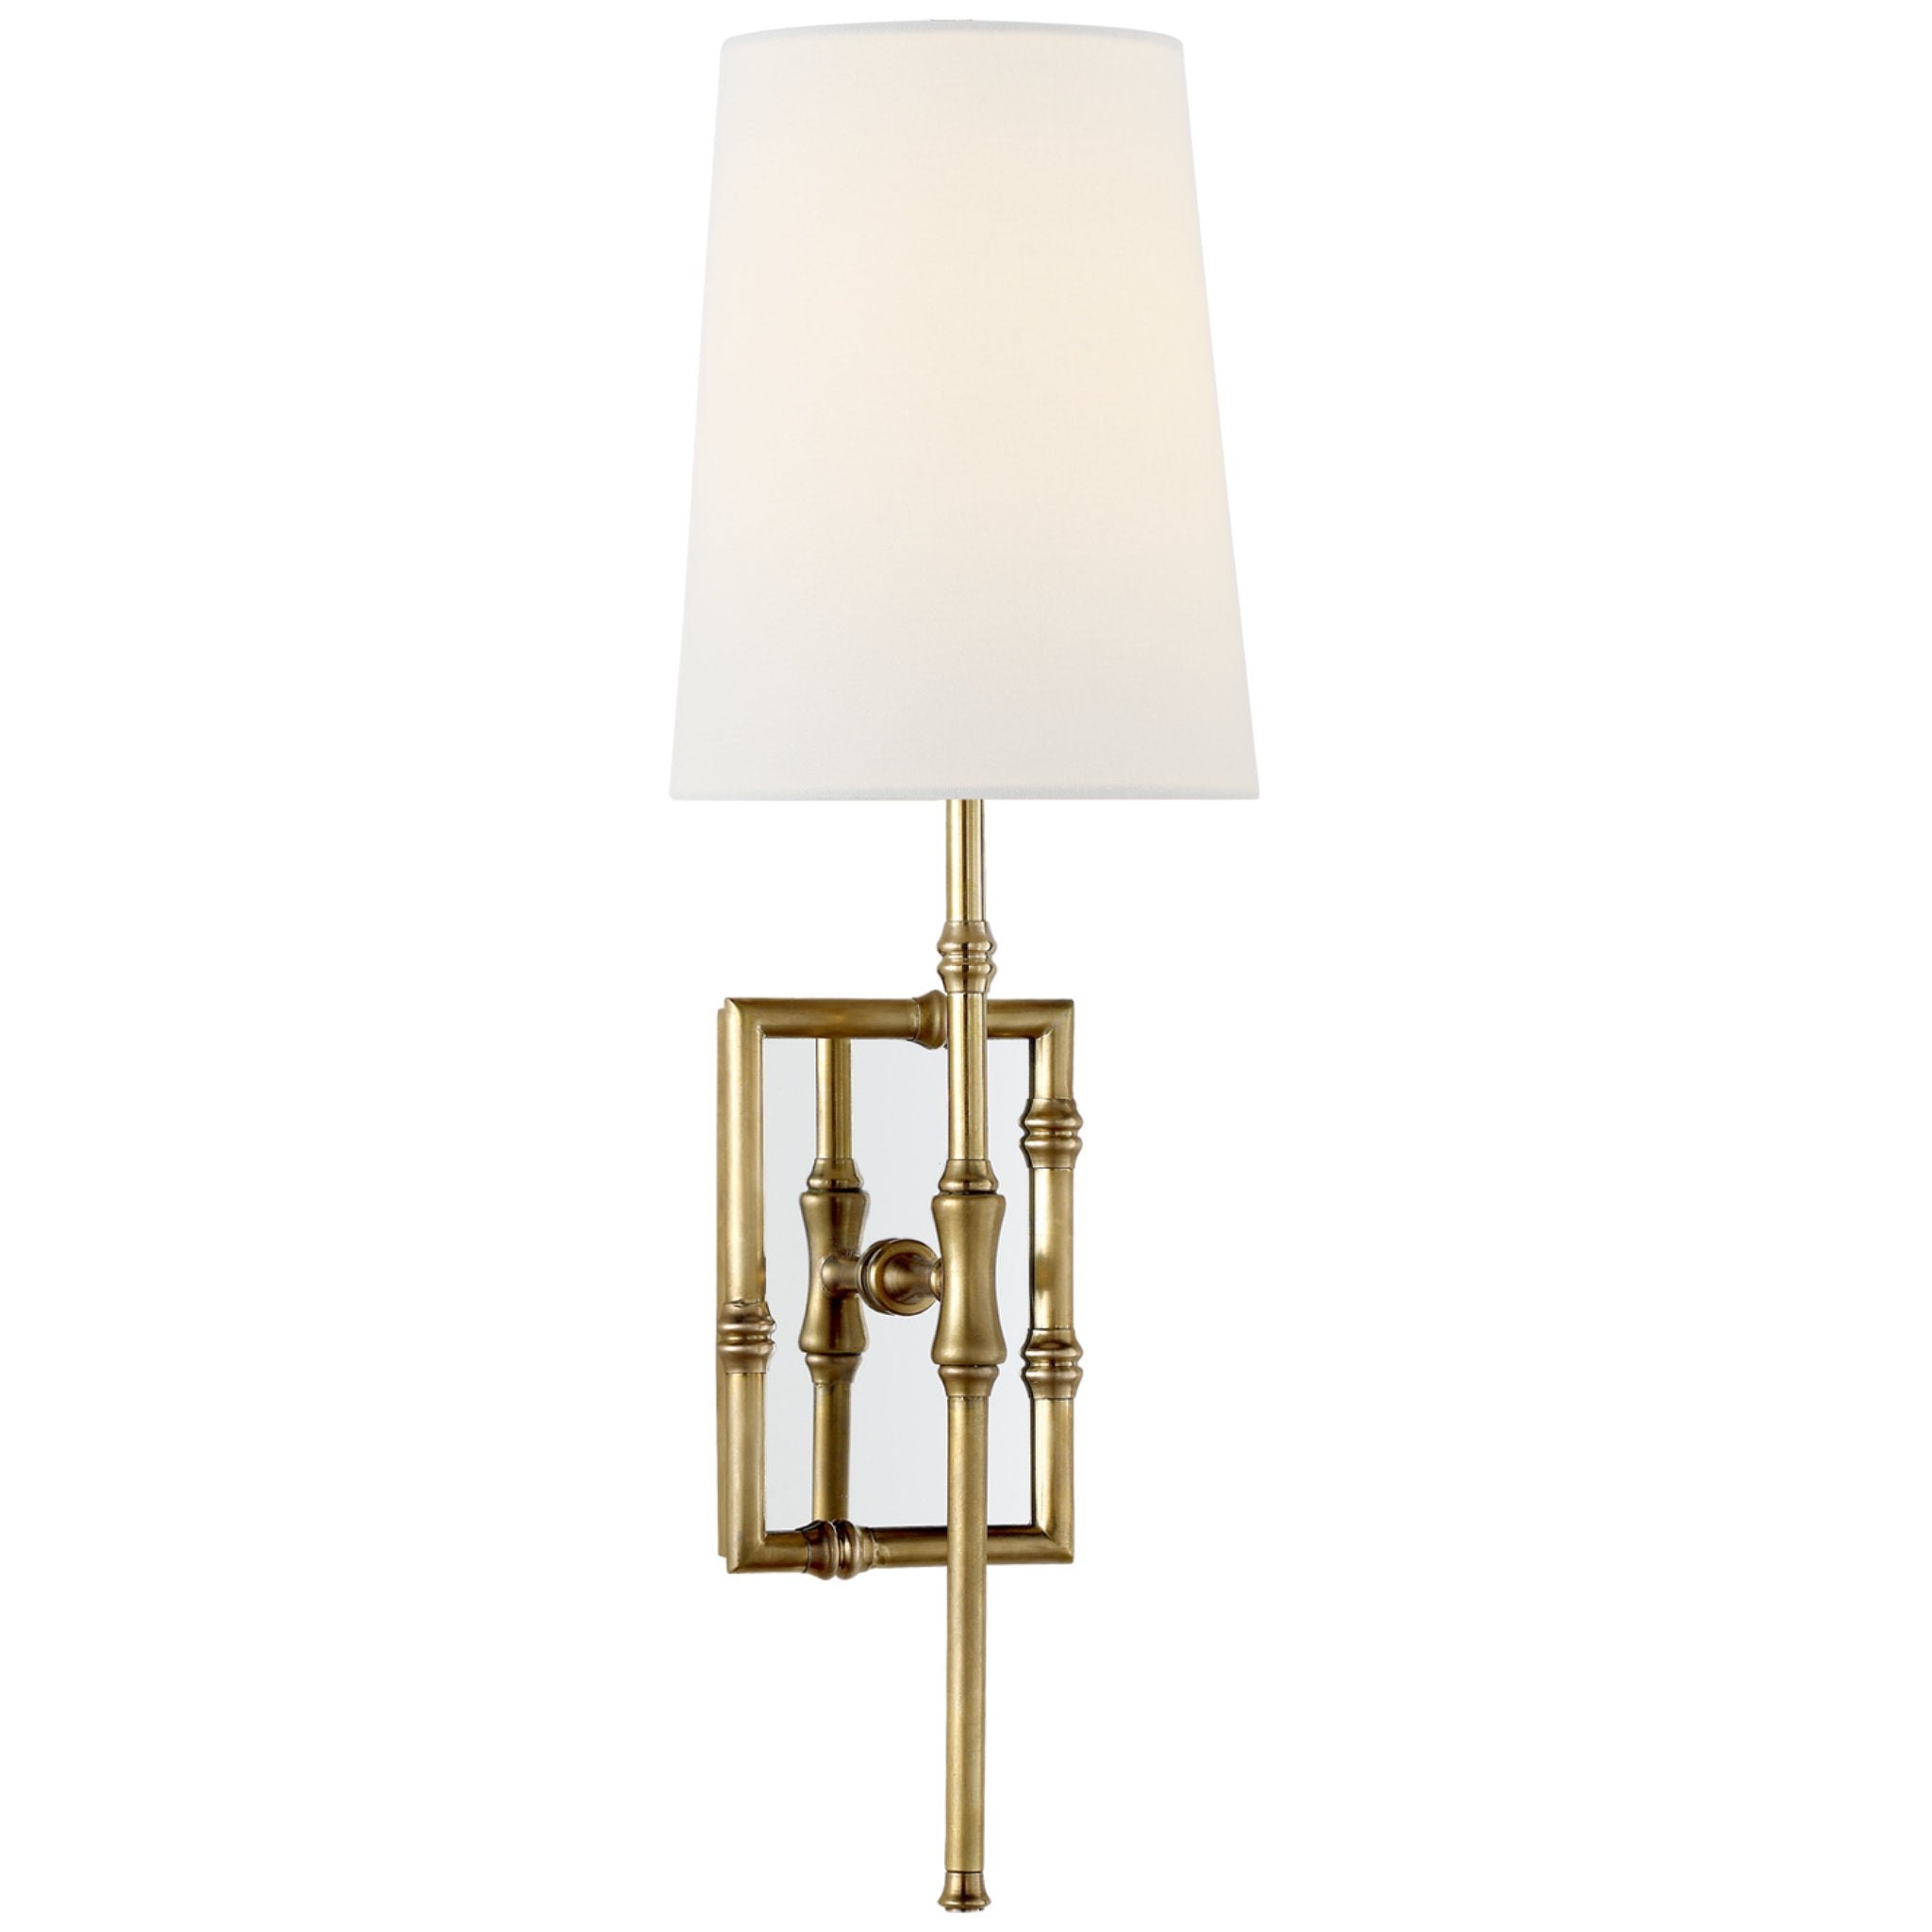 Visual Comfort Grenol Single Modern Bamboo Sconce in Hand-Rubbed Antique Brass with Linen Shade